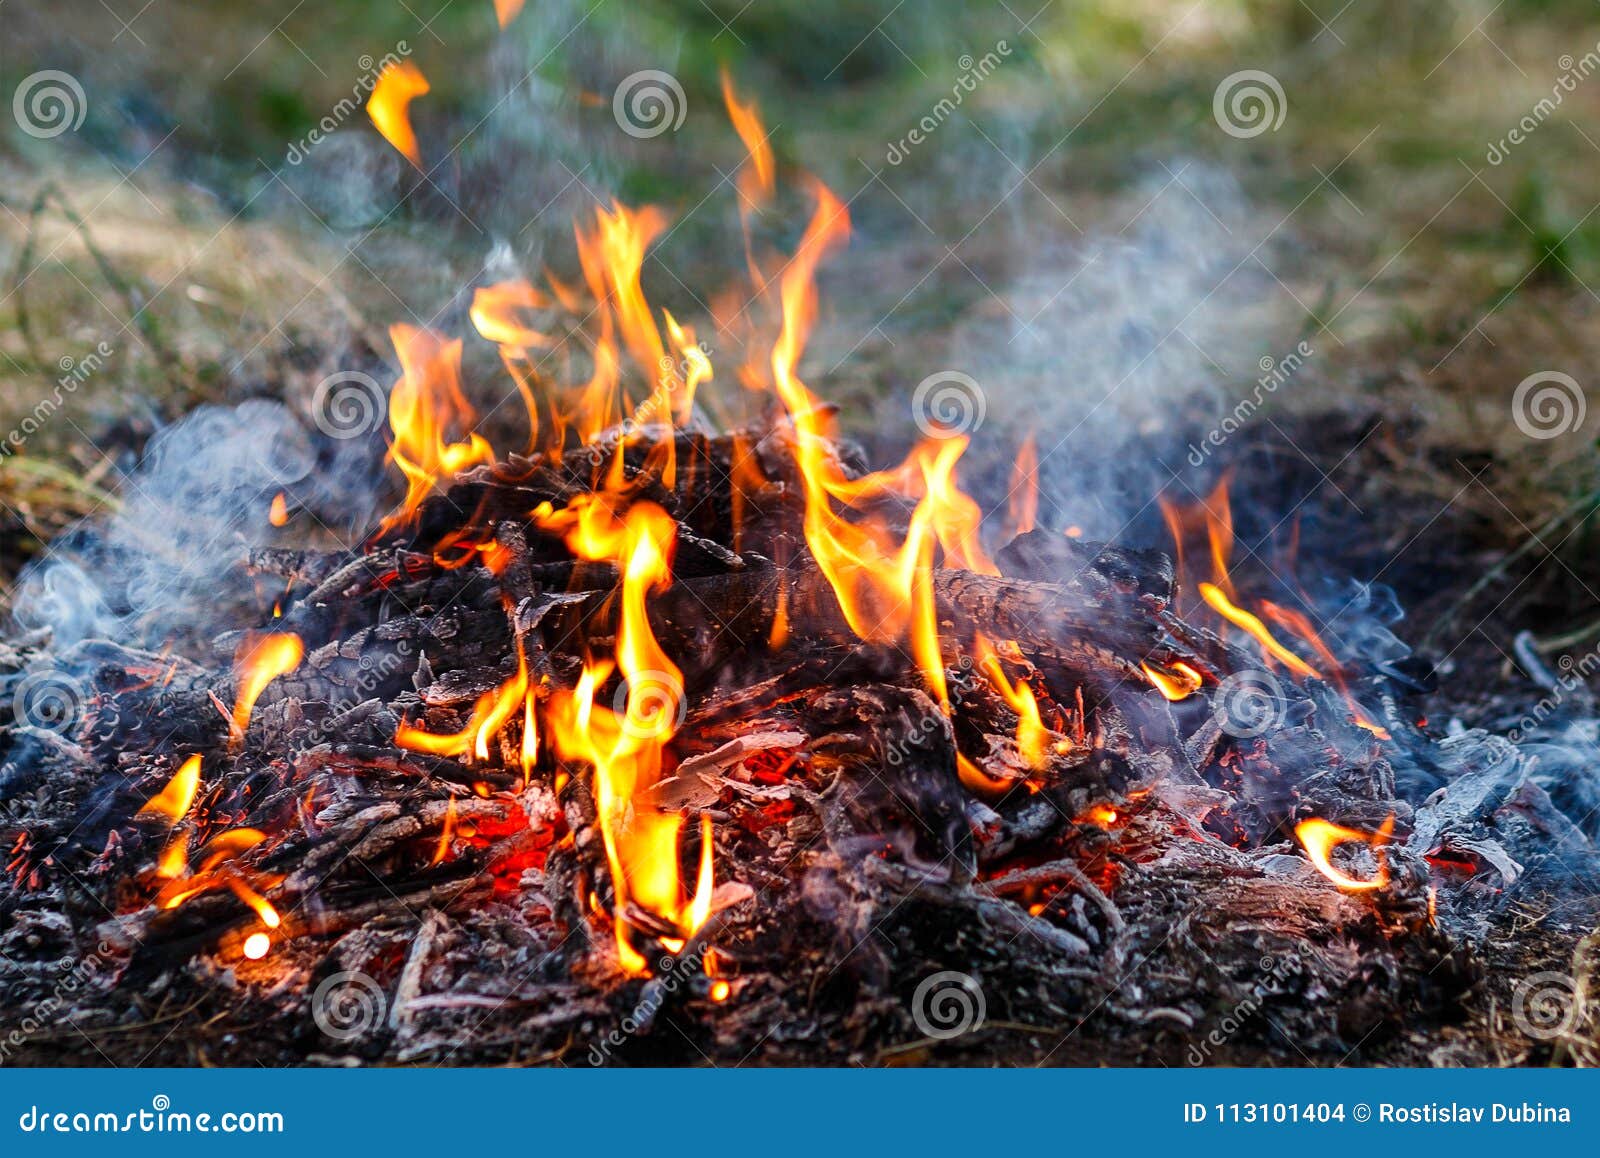 Photo of the Fire. Burning Fire with Tongues of Flame Stock Photo ...